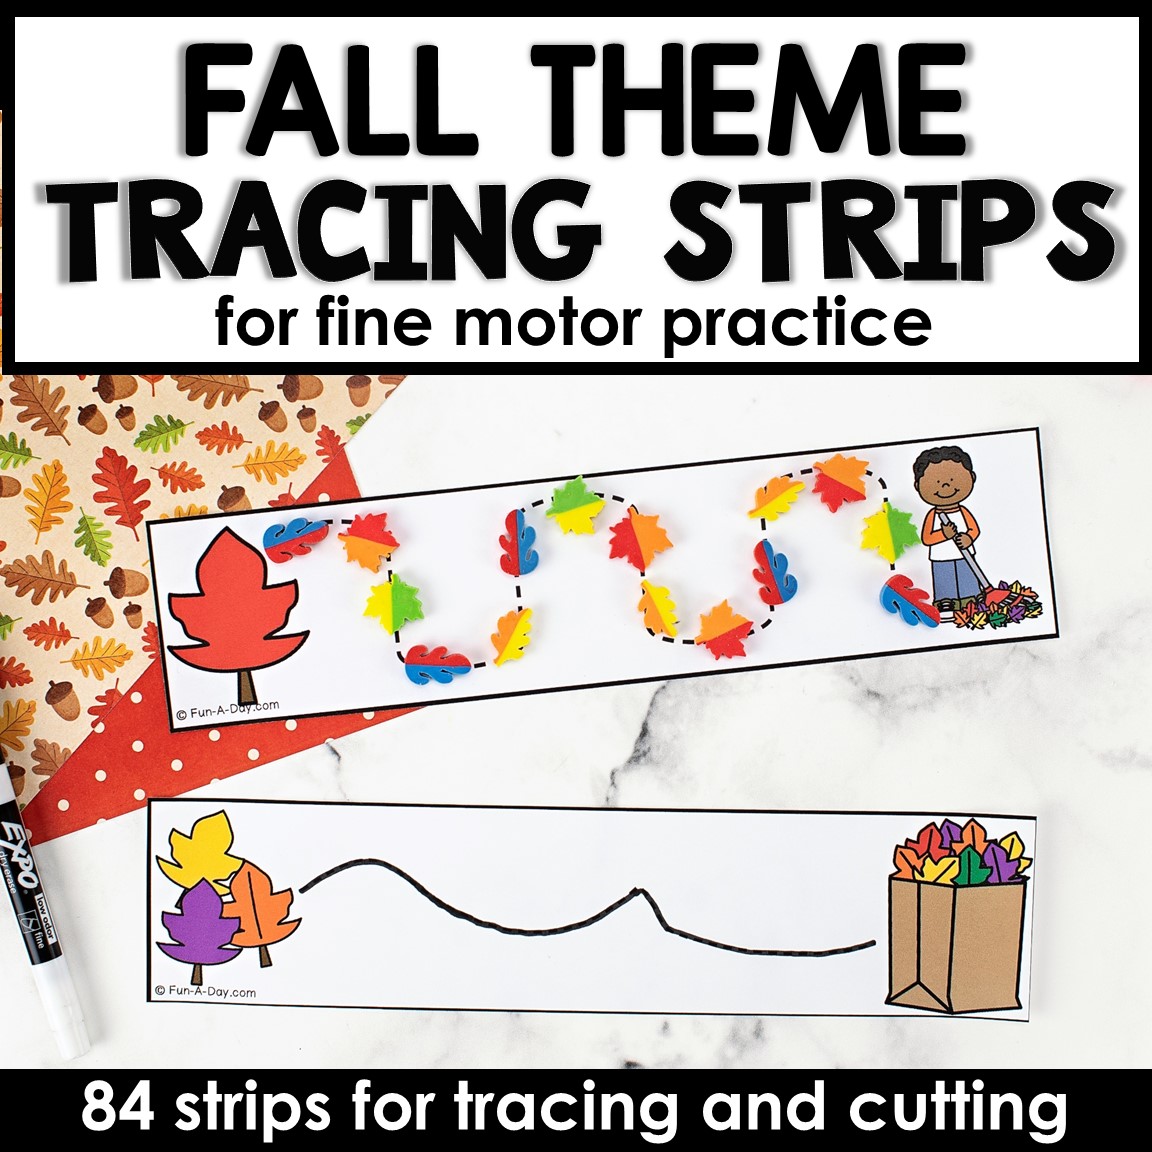 fall theme tracing strips product cover